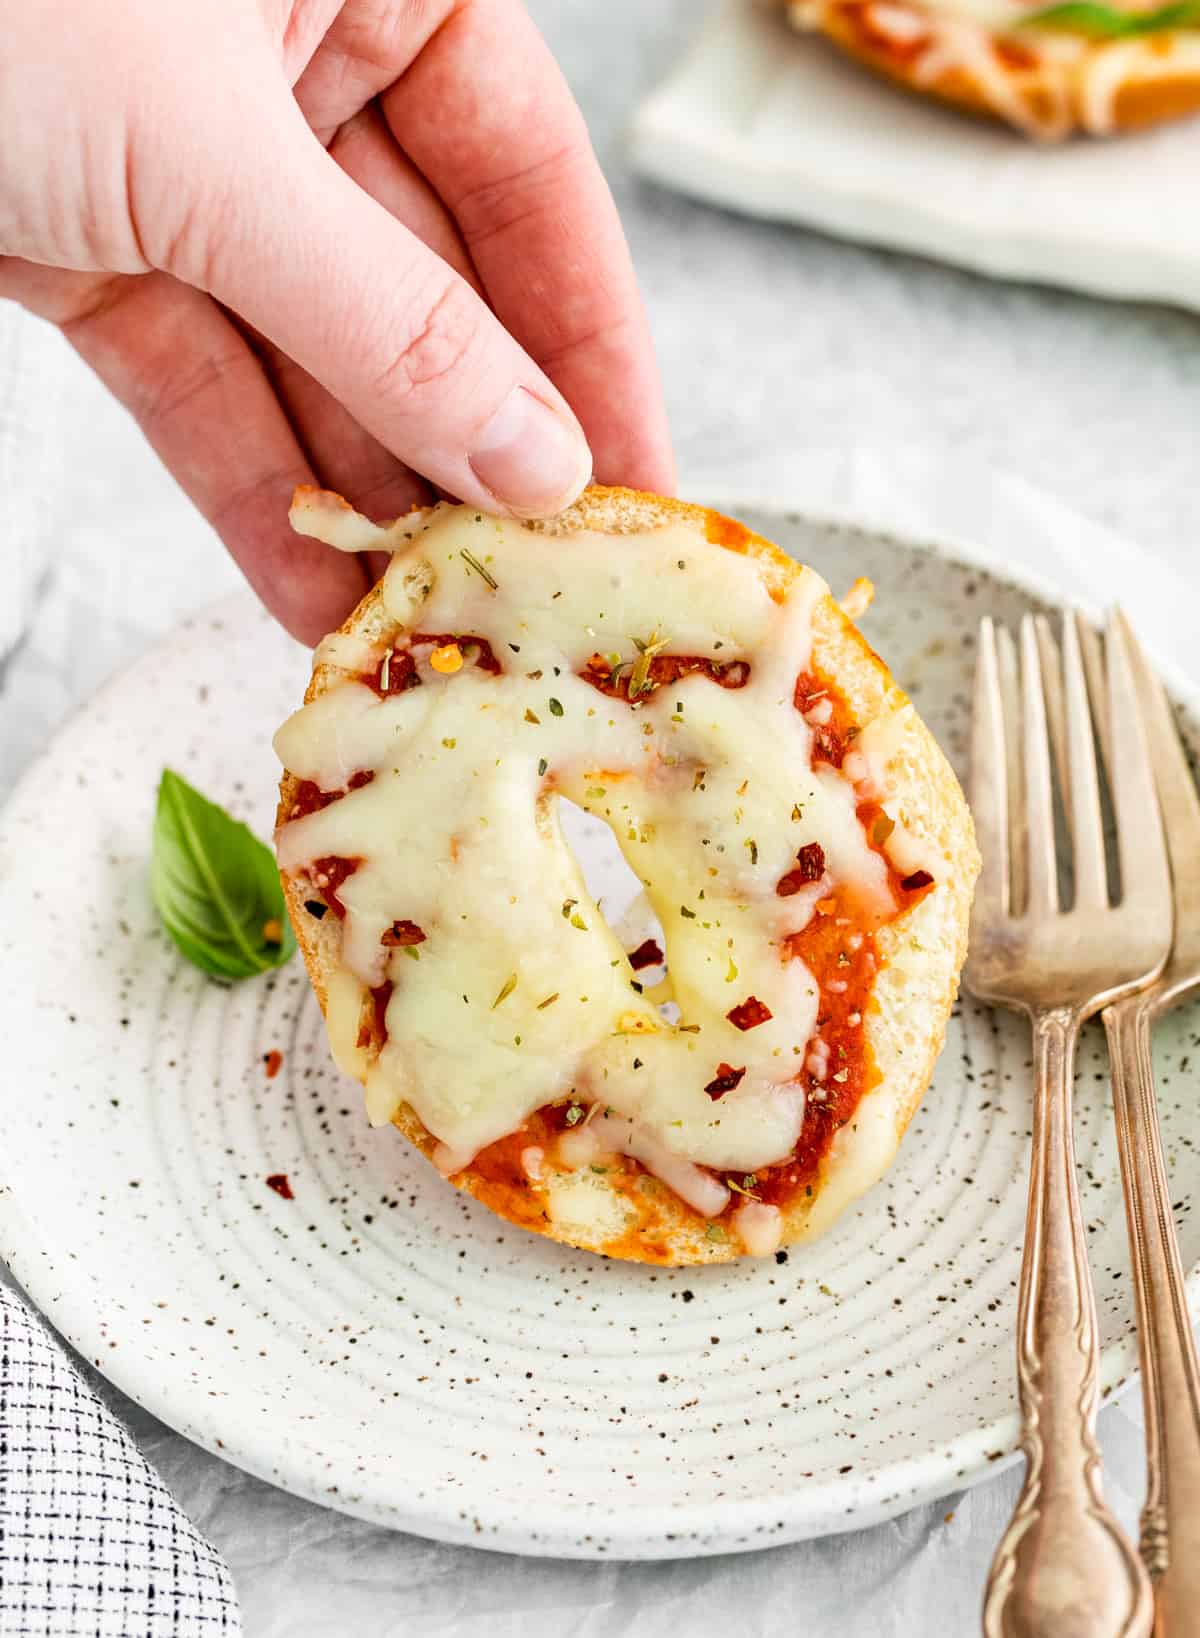 Hand holding up one of the Mini Pizza Bagels slightly off plate with forks and basil leaf.